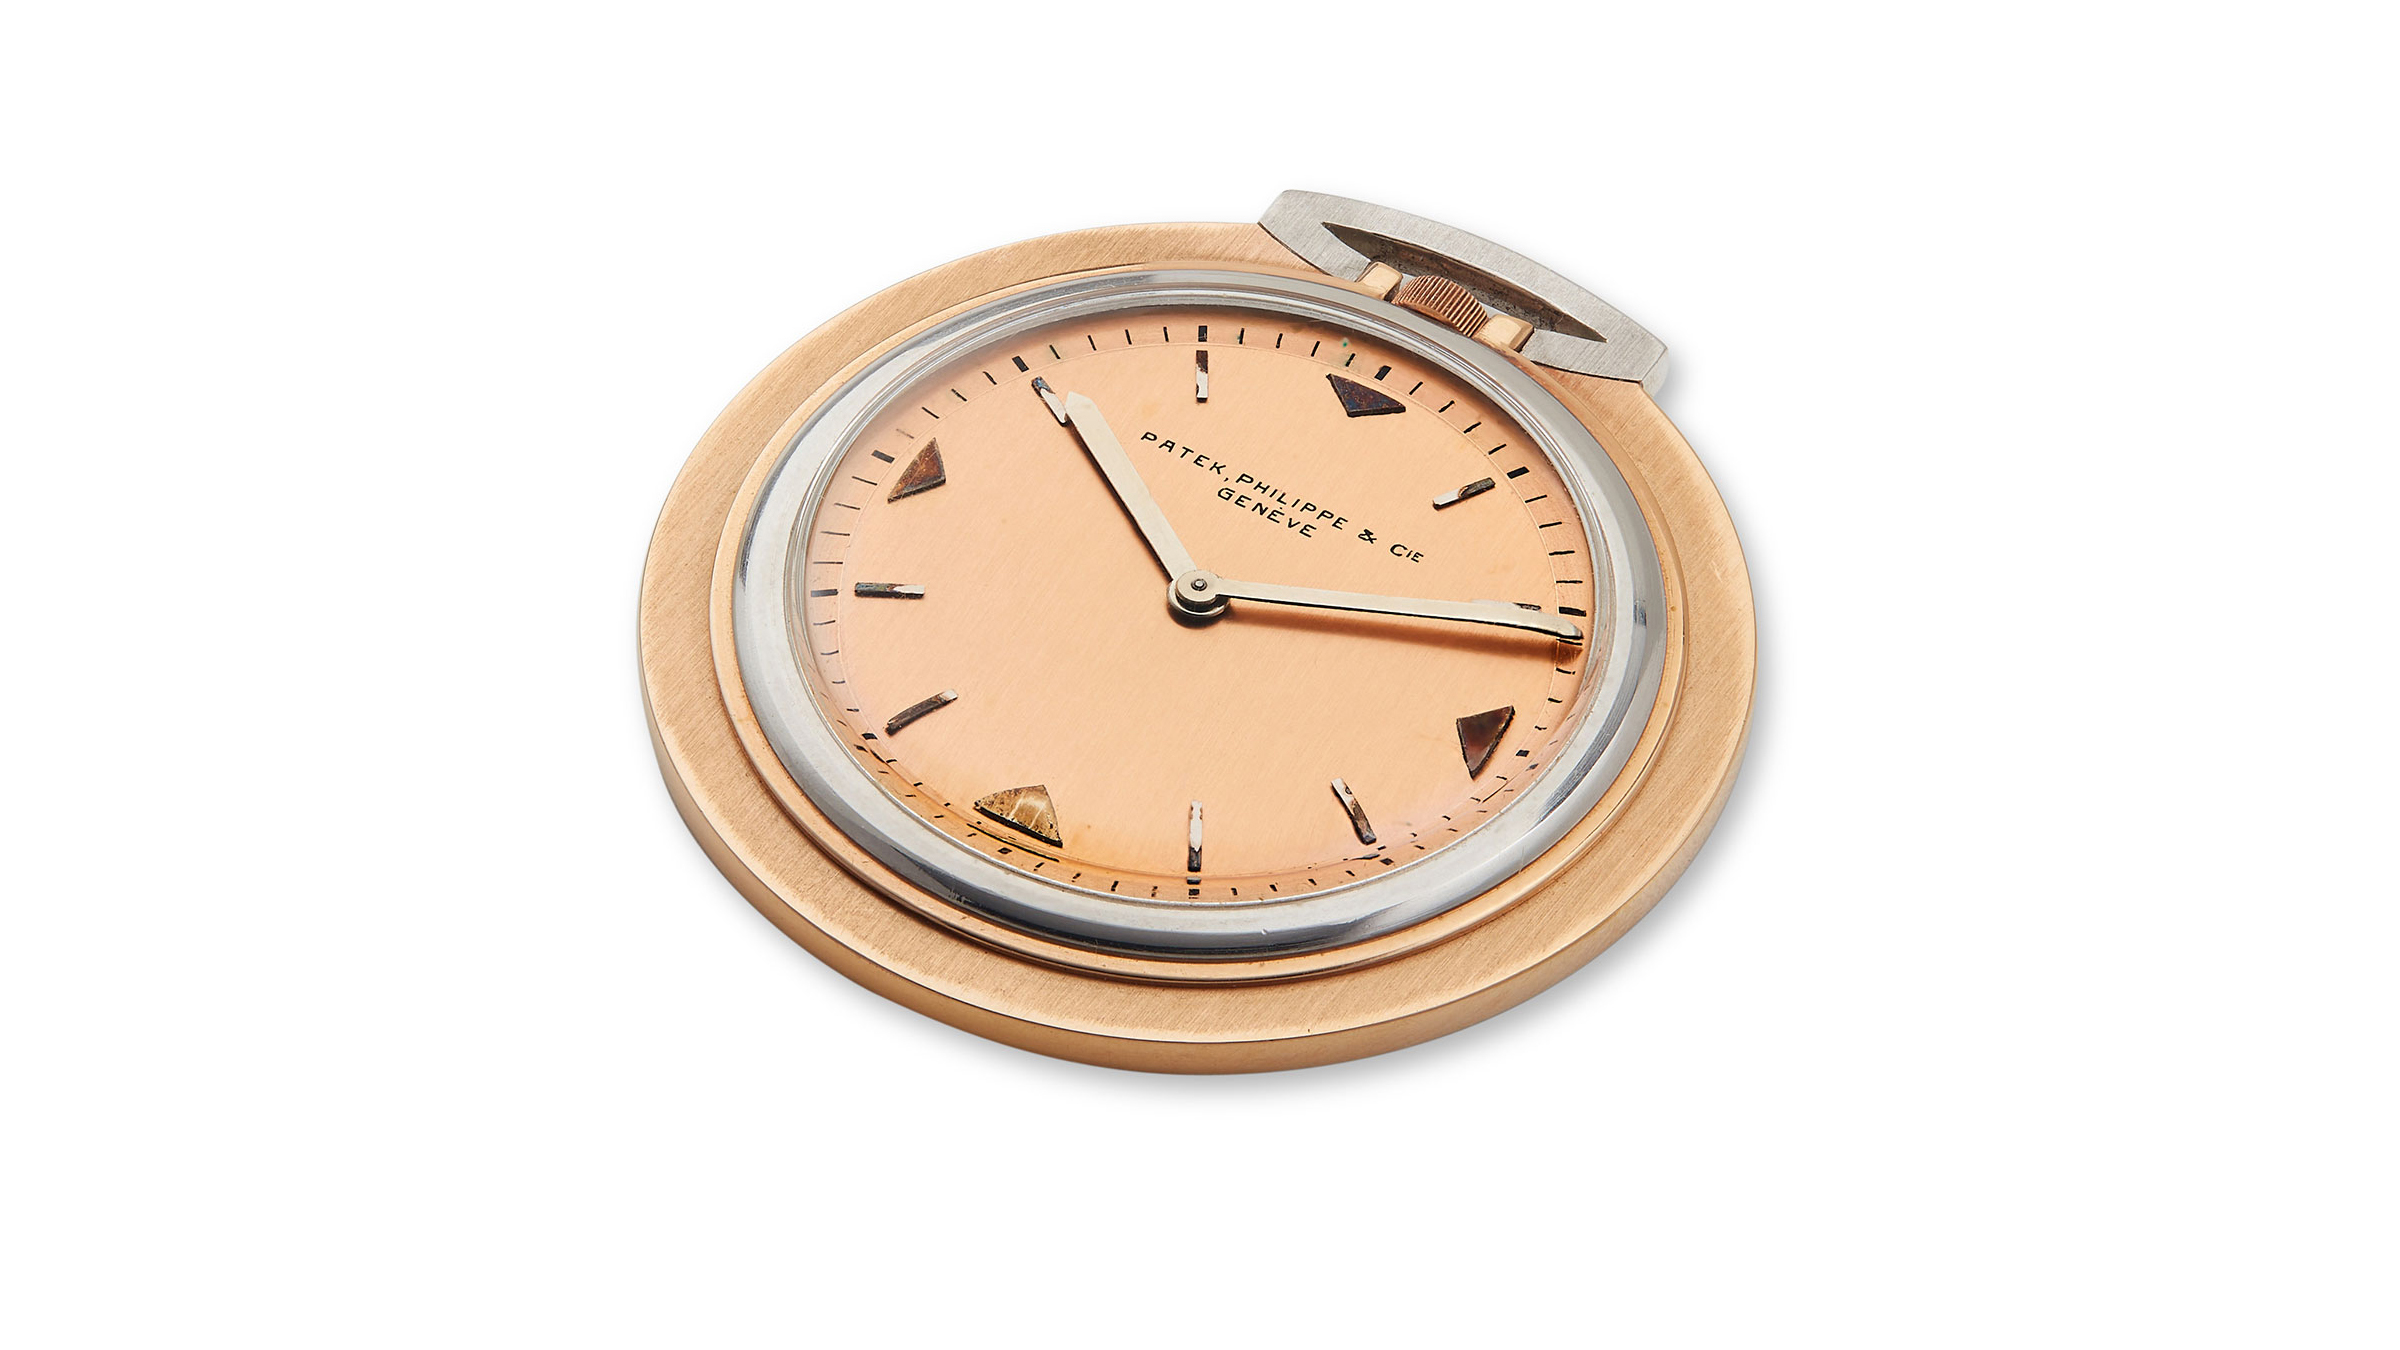 Bring a Loupe: An Art Deco Patek Philippe Pocket Watch, A GMT 